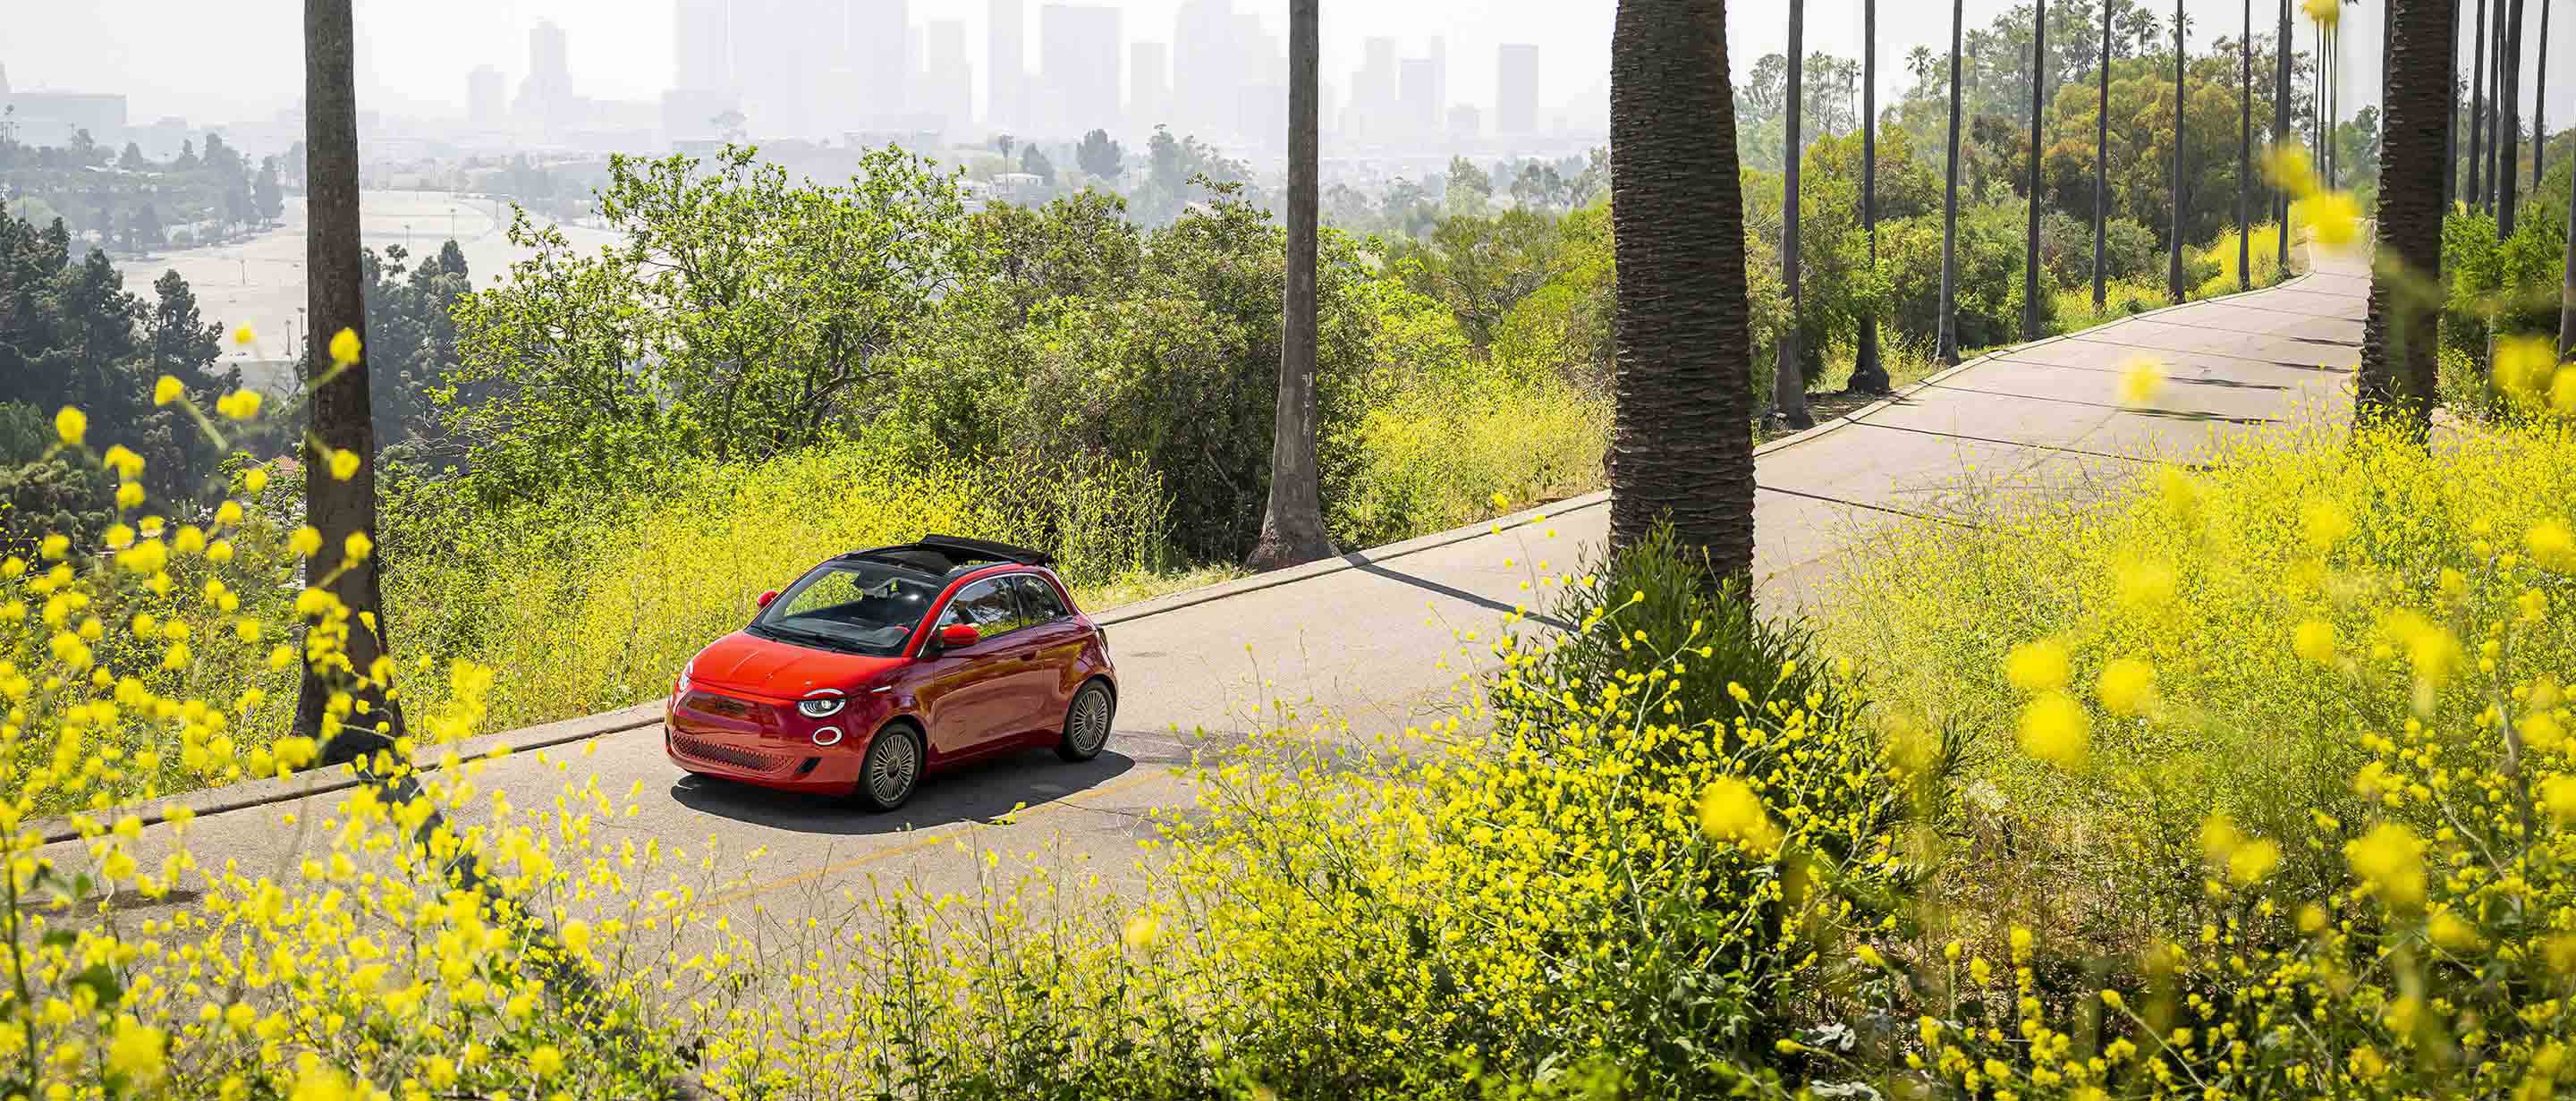 A red European model Fiat 500e being driven on a road surrounded by trees and bushes, with a river and high-rise buildings in the distance.